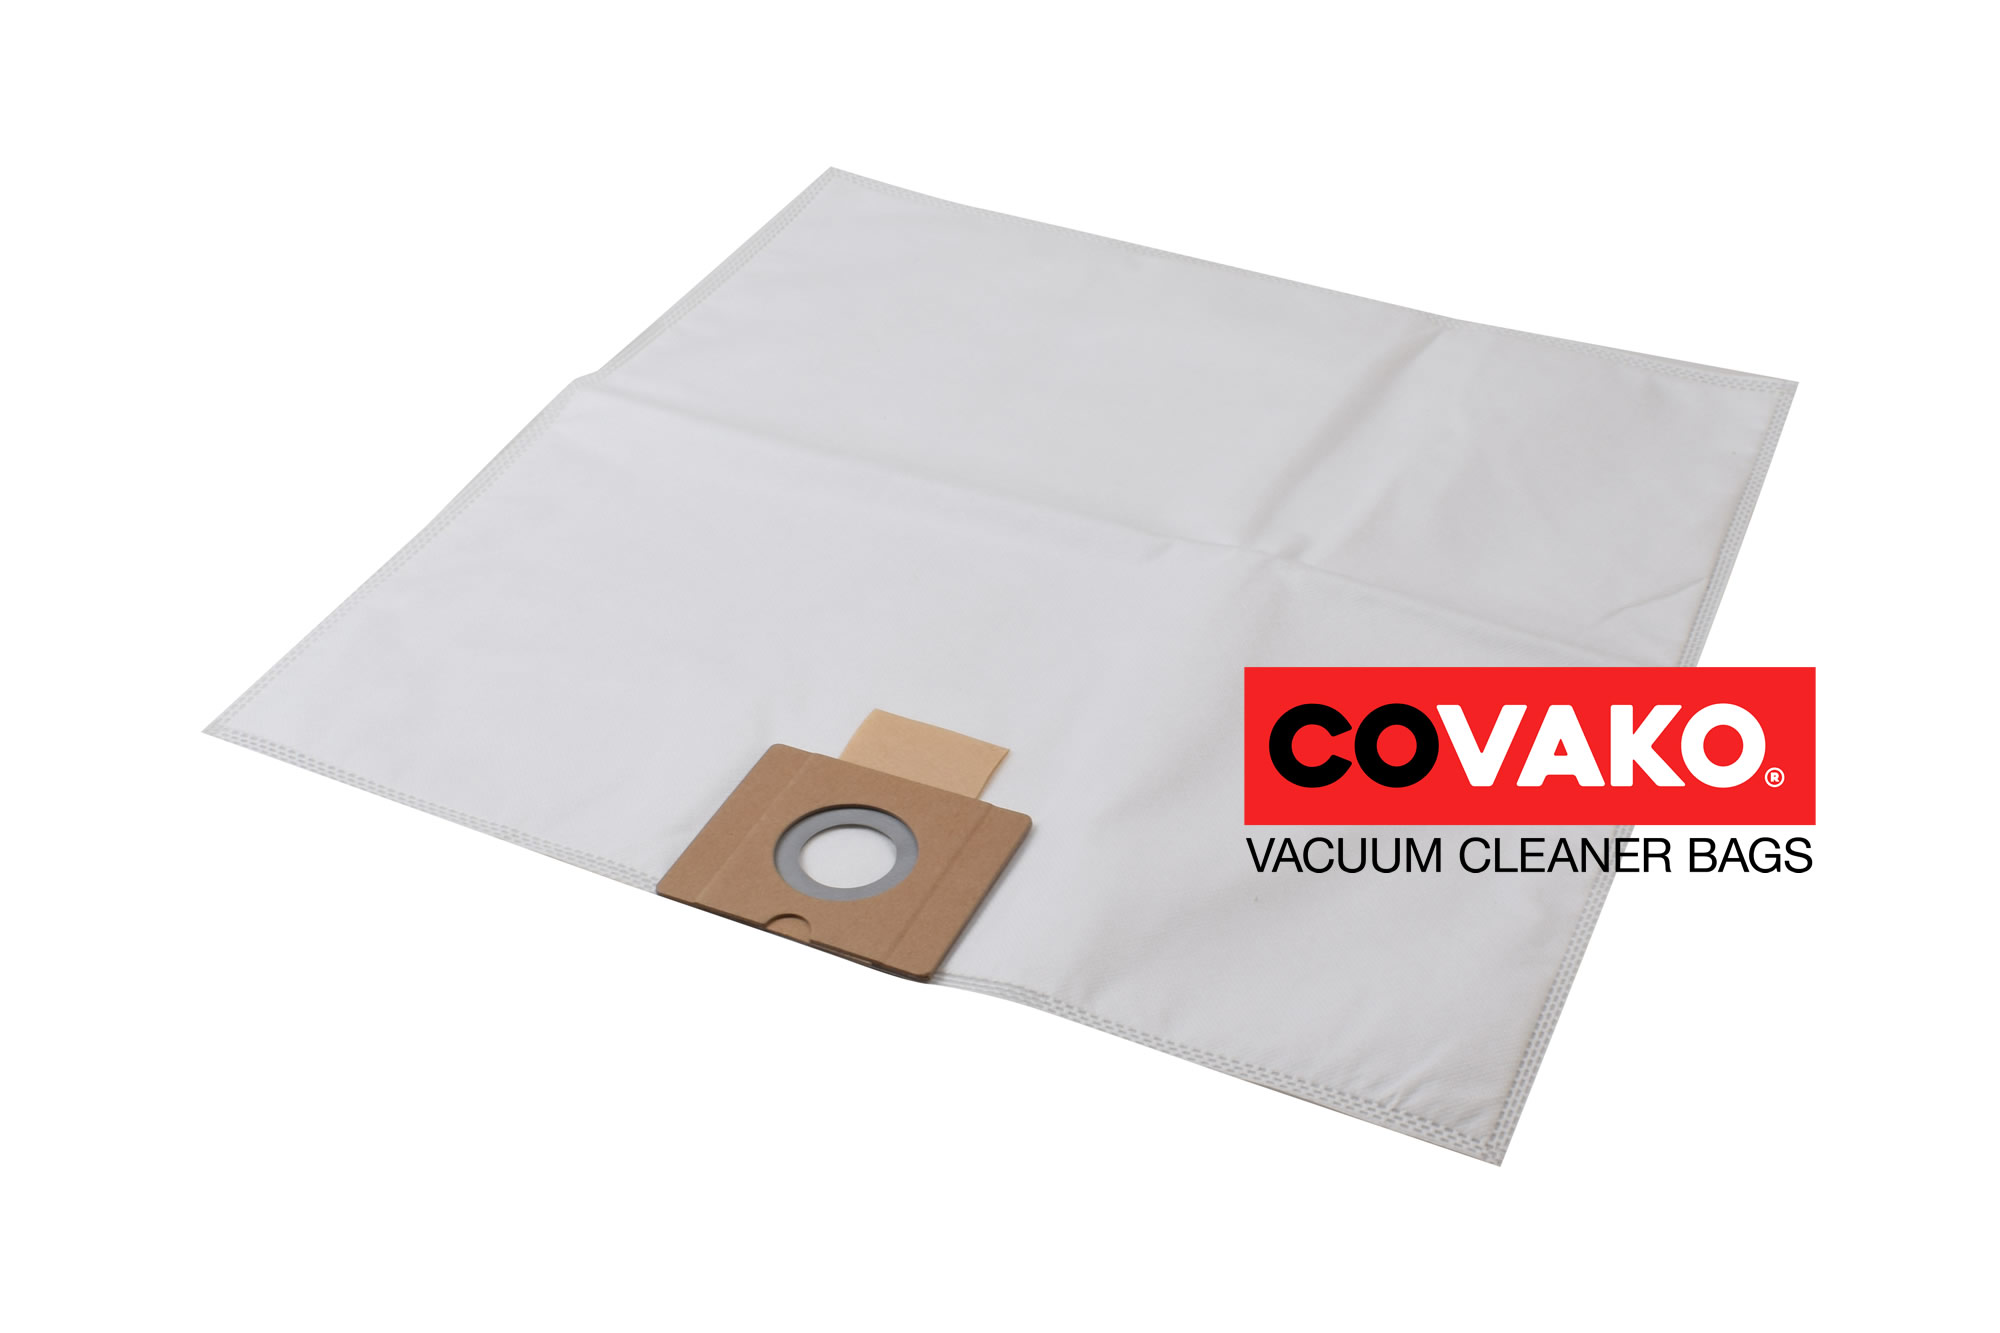 I-vac Q-be better / Synthesis - I-vac vacuum cleaner bags